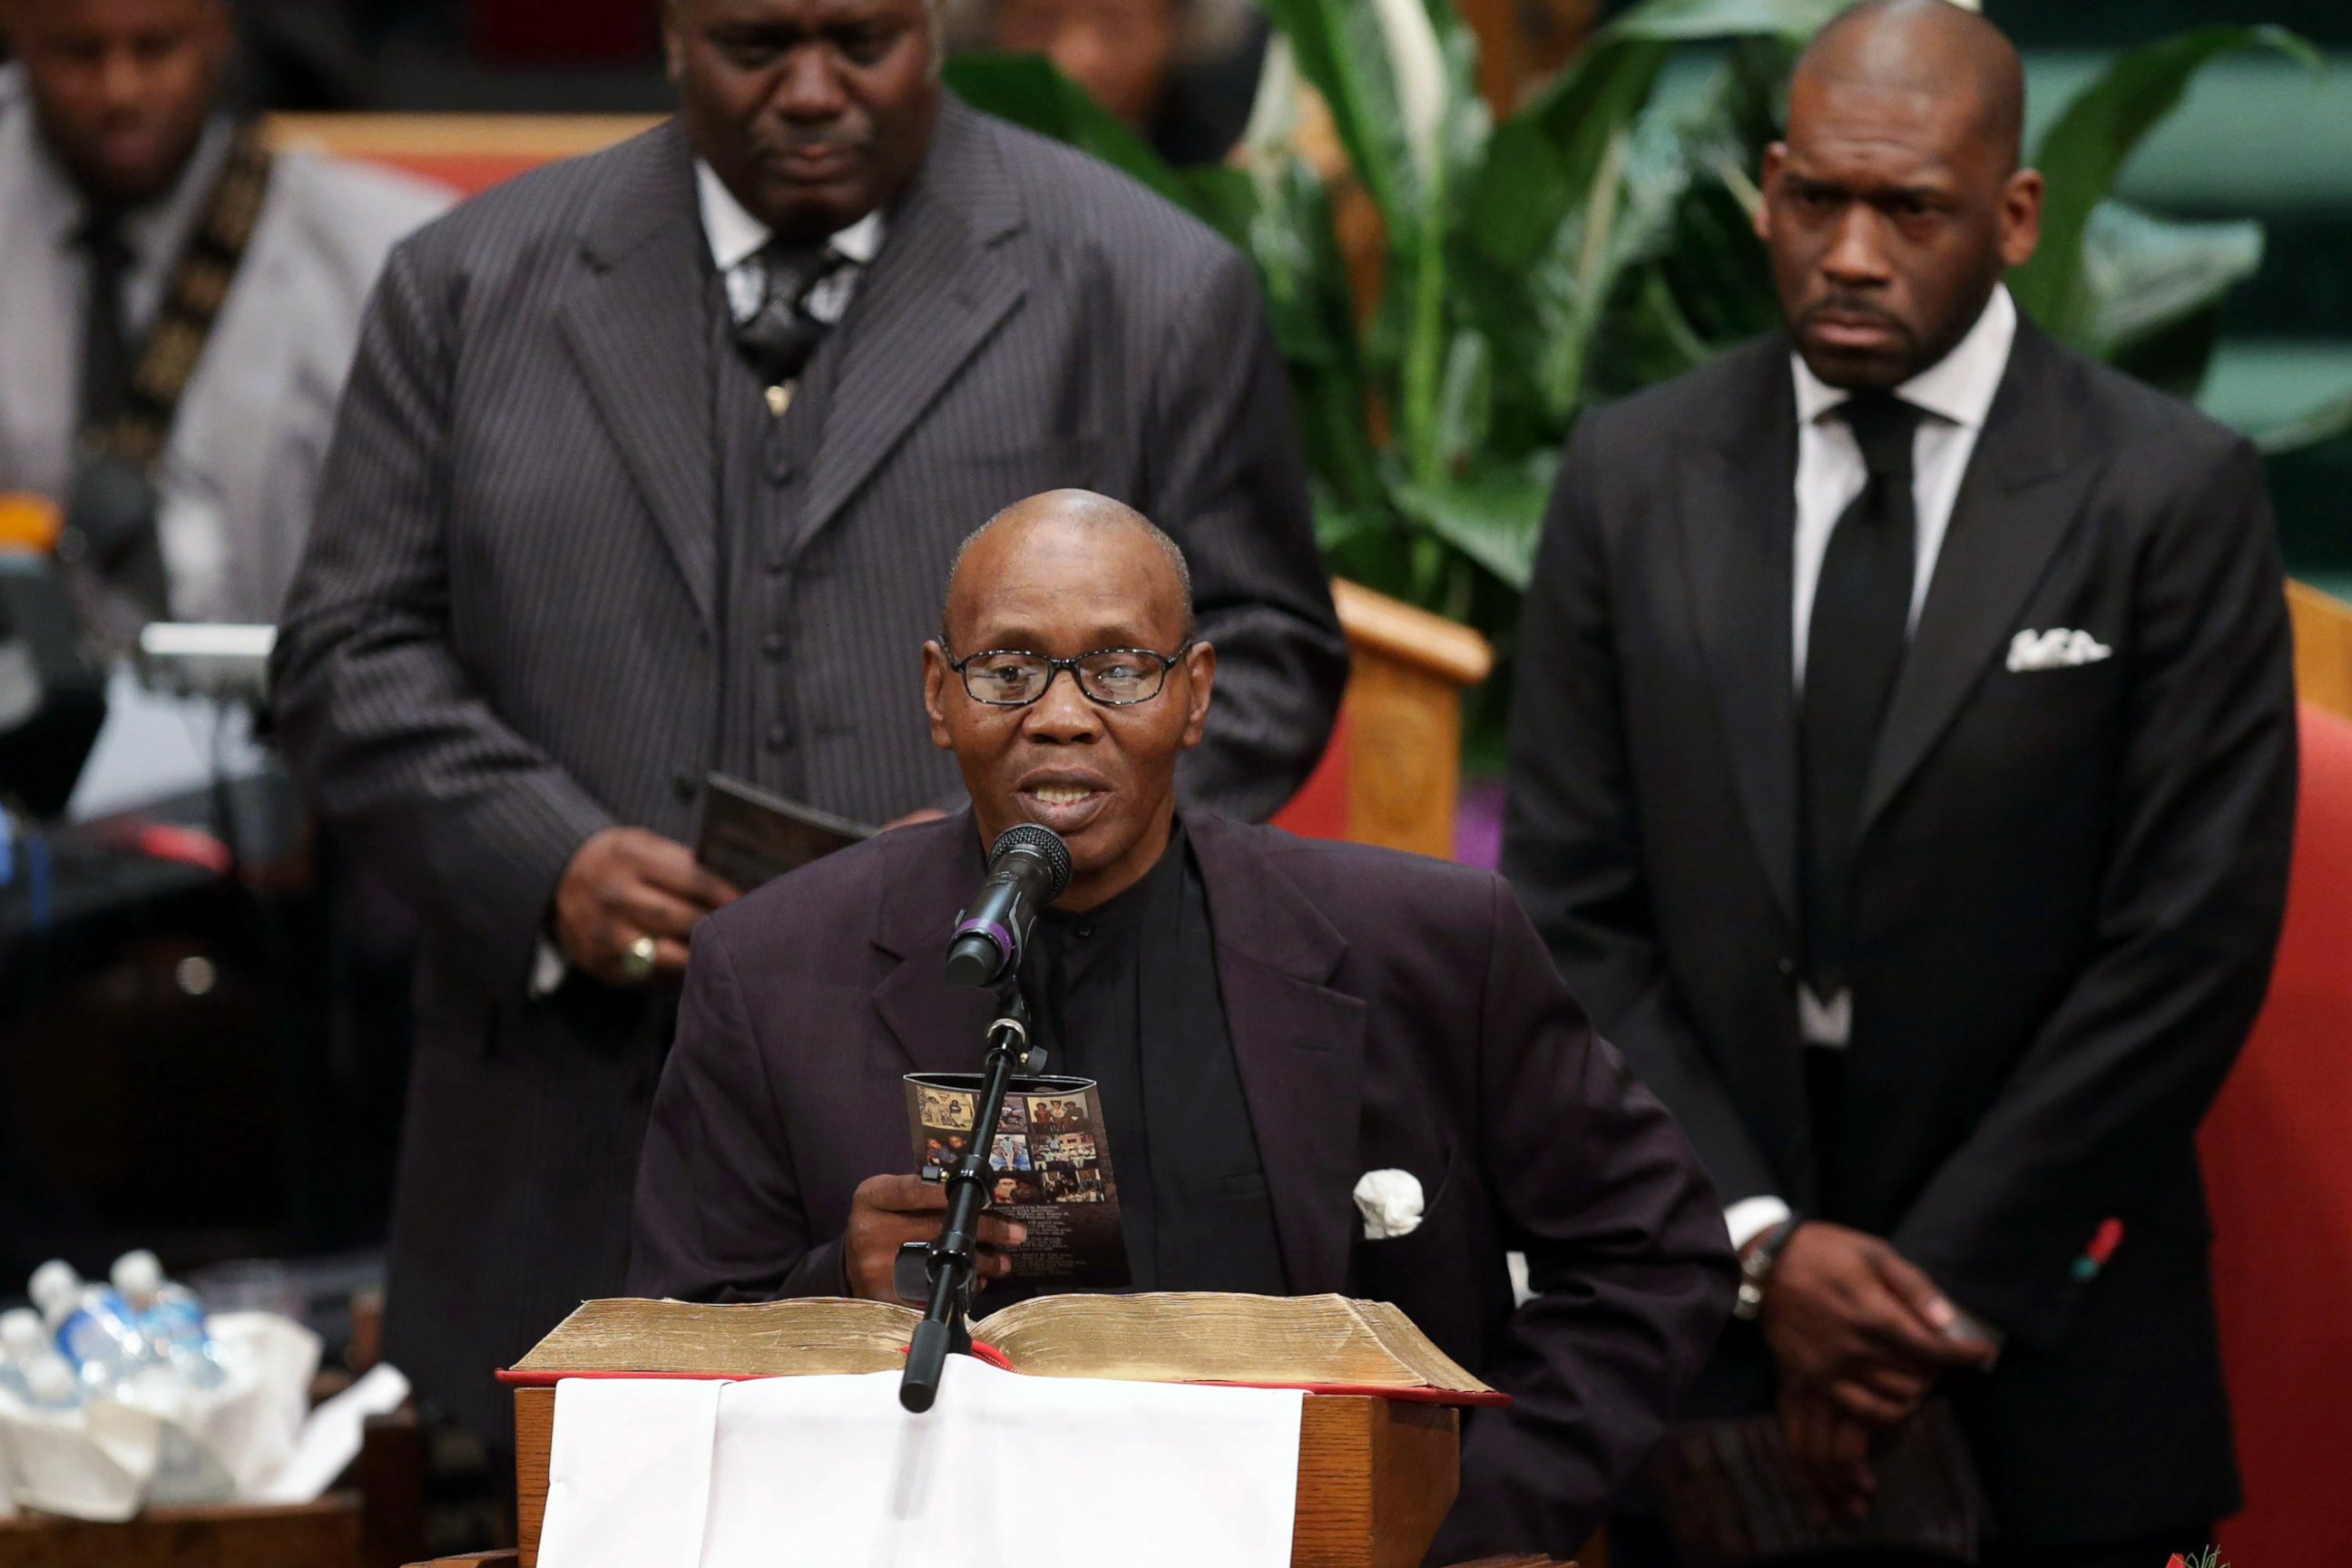 PHOTO: Freddie Gray's stepfather Richard Shipley reads a poem written for Gray during his funeral at the New Shiloh Baptist Church during his funeral in Baltimore, April 27, 2015.